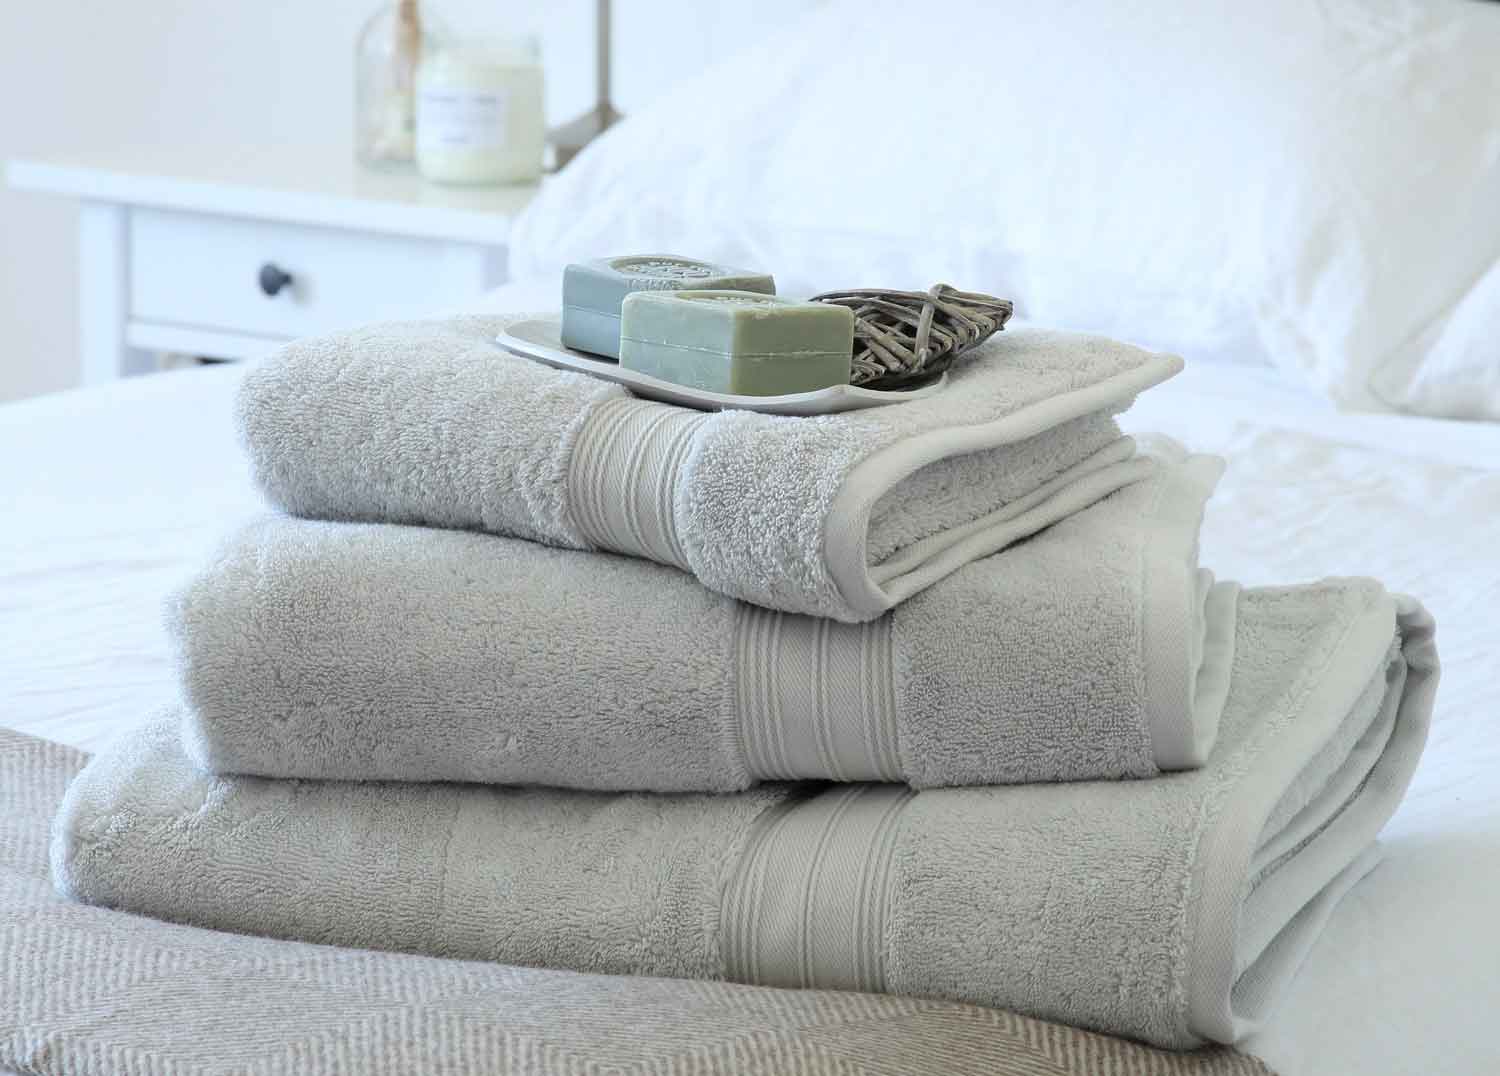 Luxury bath towel bundle on bed with soap